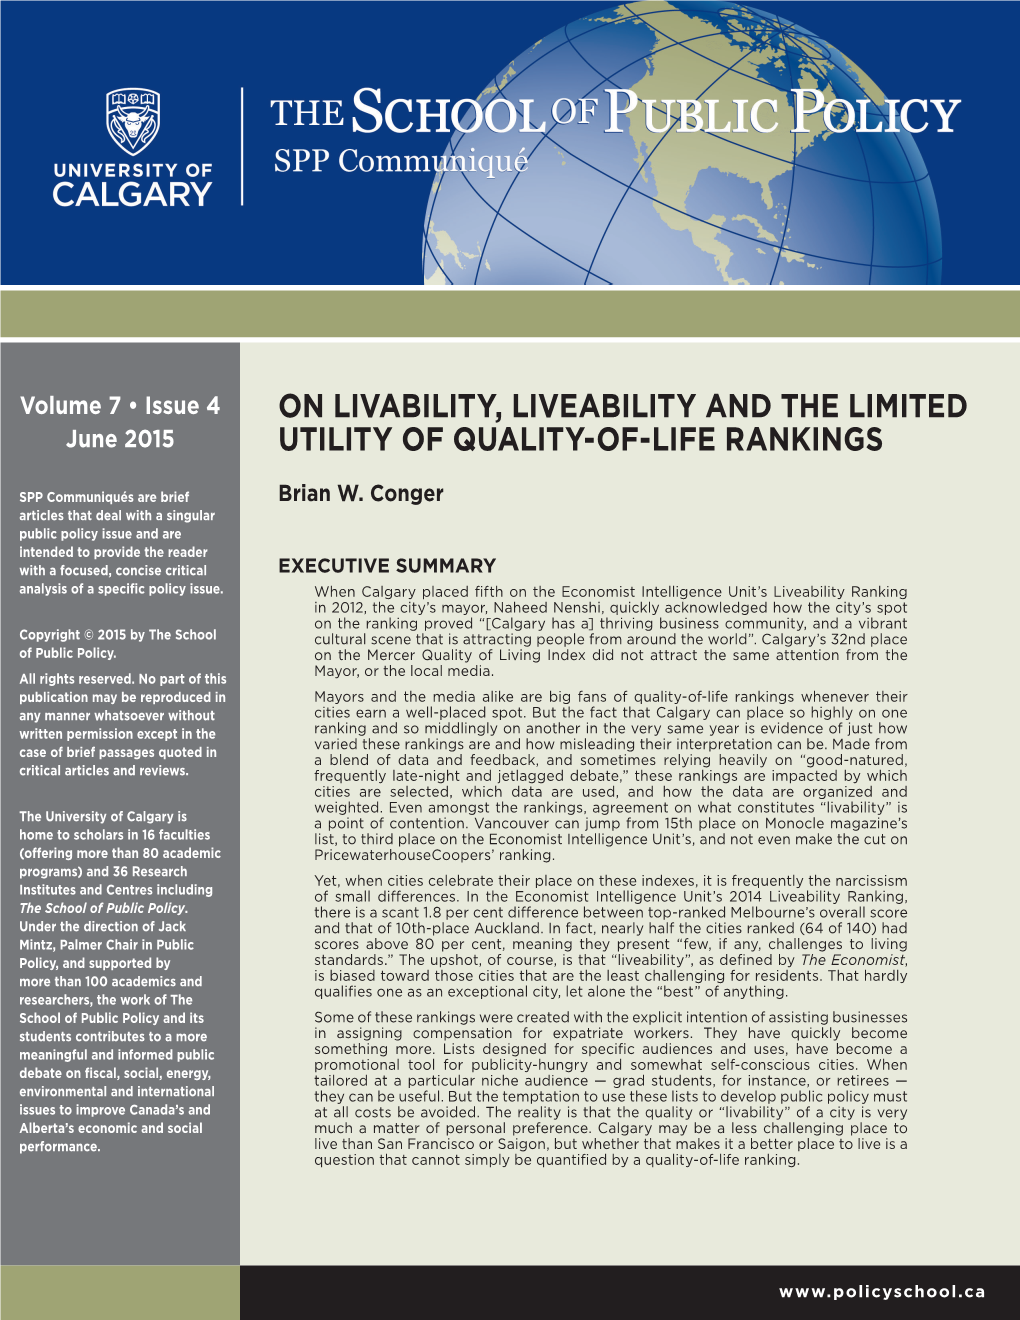 ON LIVABILITY, LIVEABILITY and the LIMITED June 2015 UTILITY of QUALITY-OF-LIFE RANKINGS